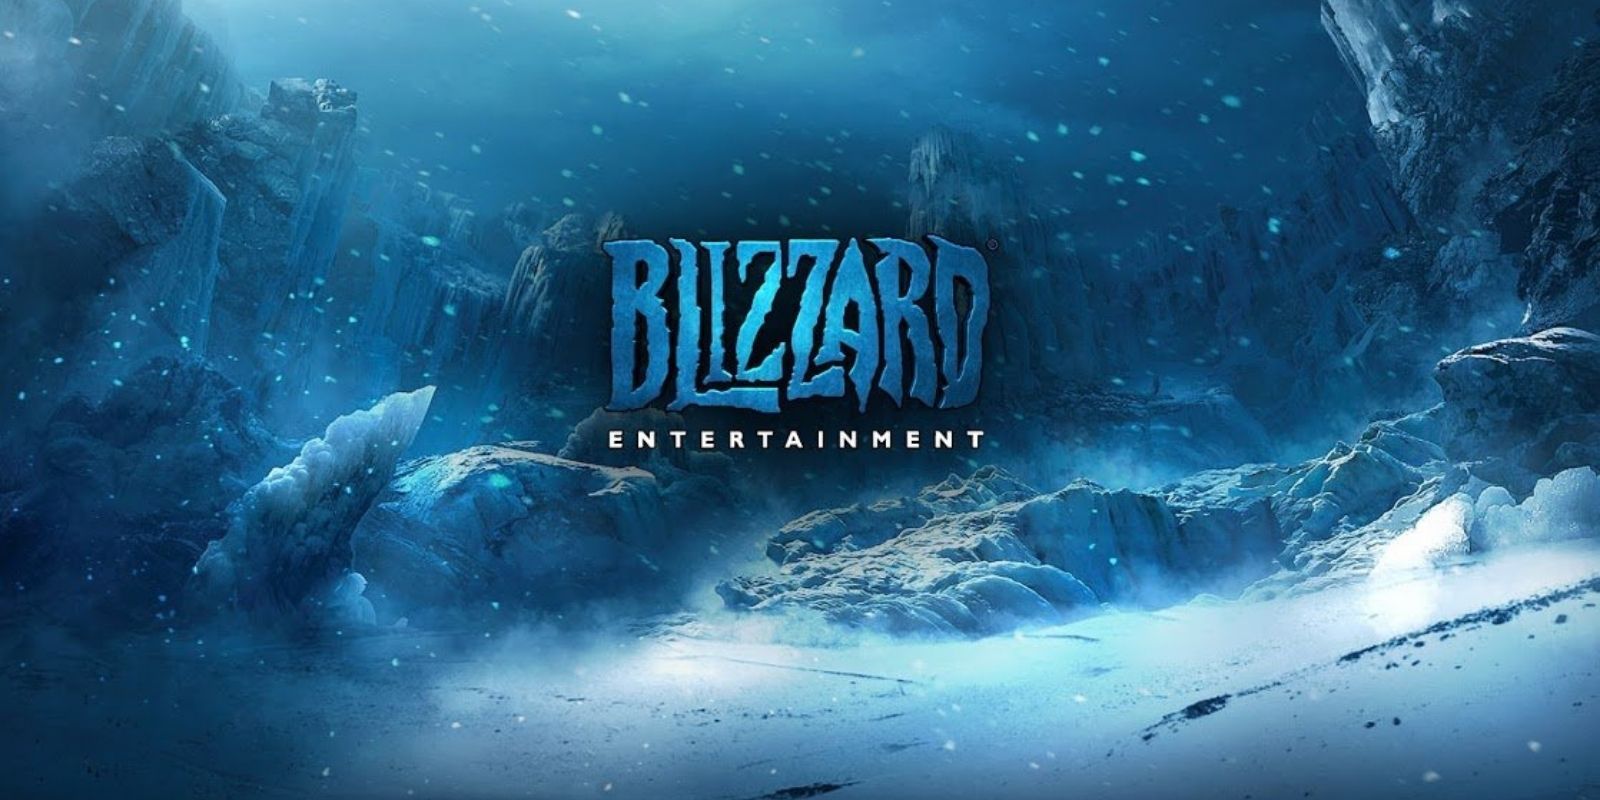 Blizzard Entertainment logo surrounded by ice and snow